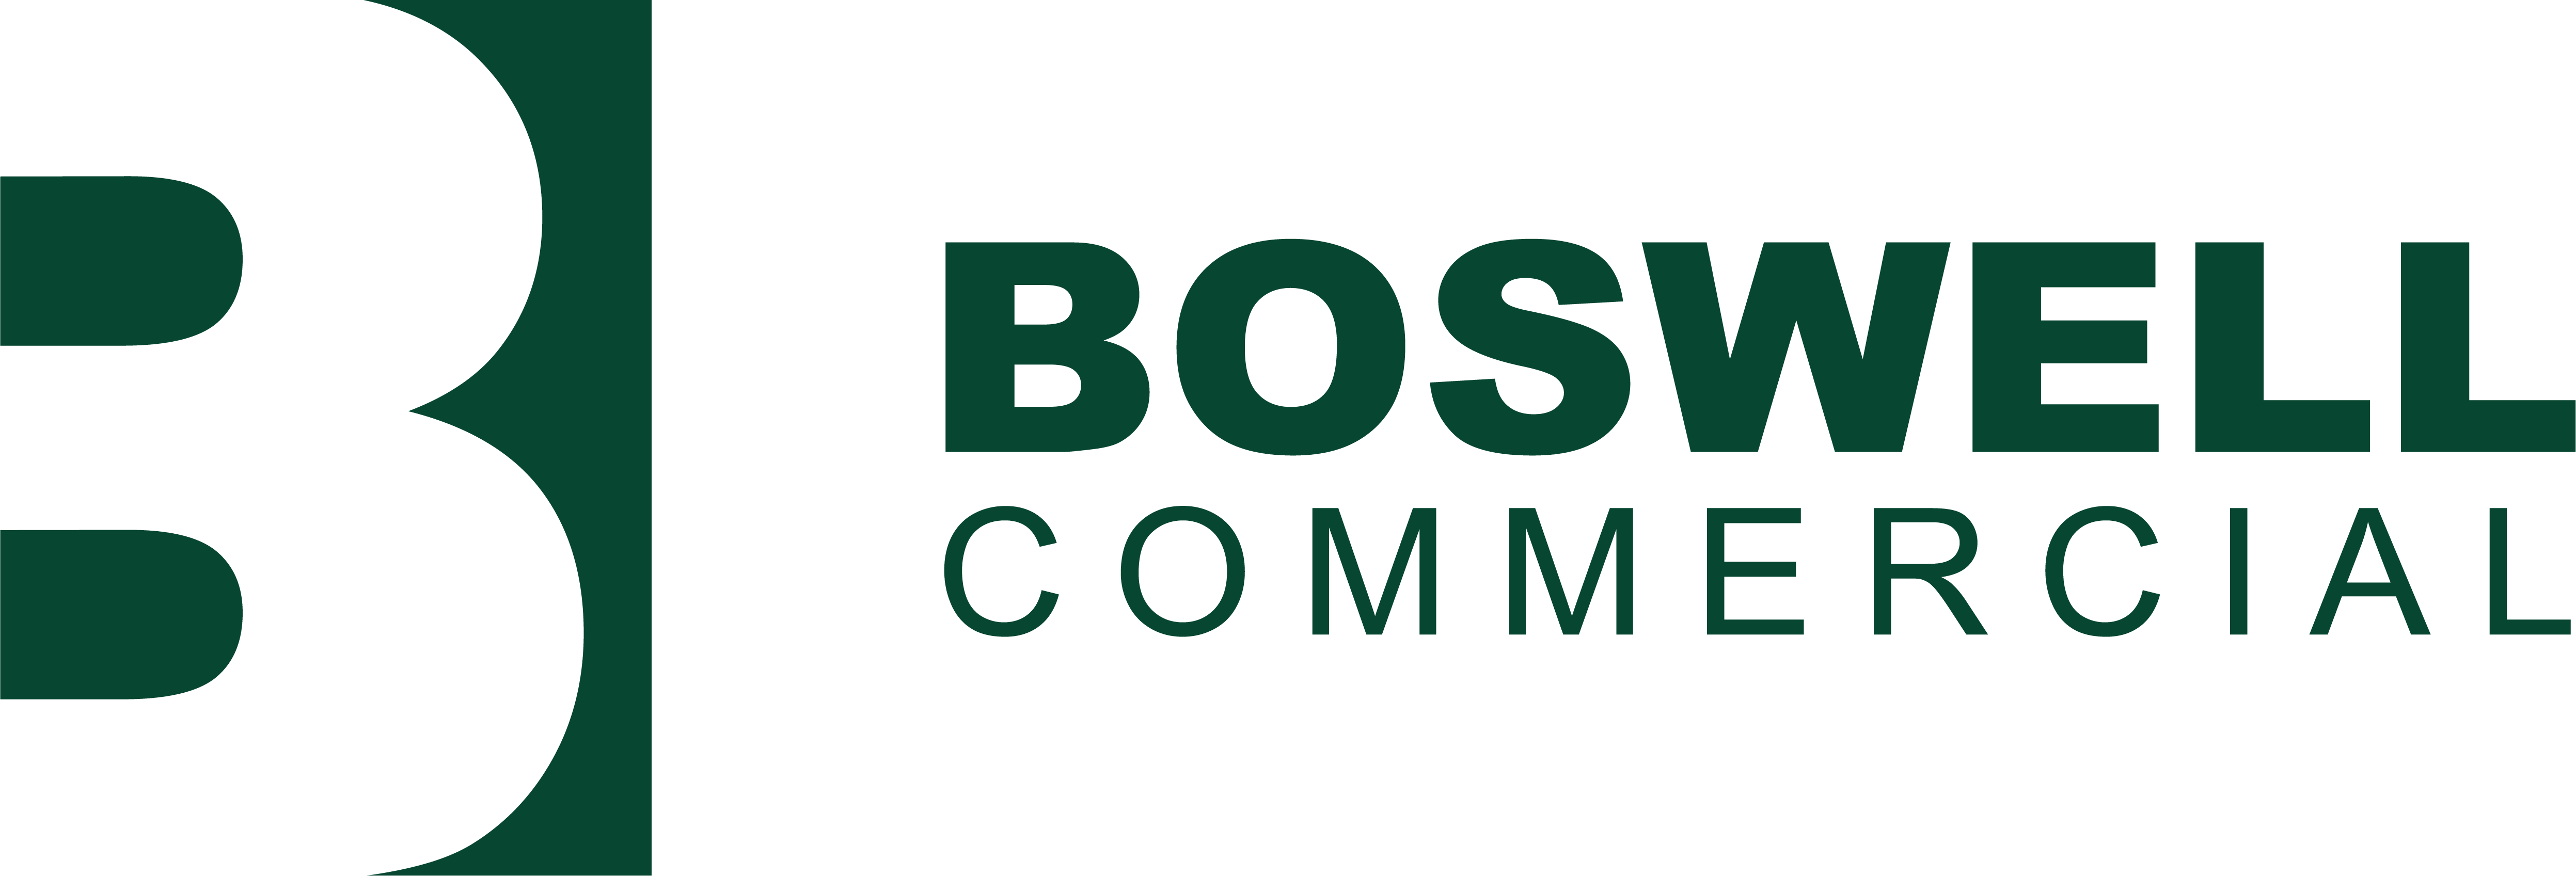 BOSWELL COMMERCIAL